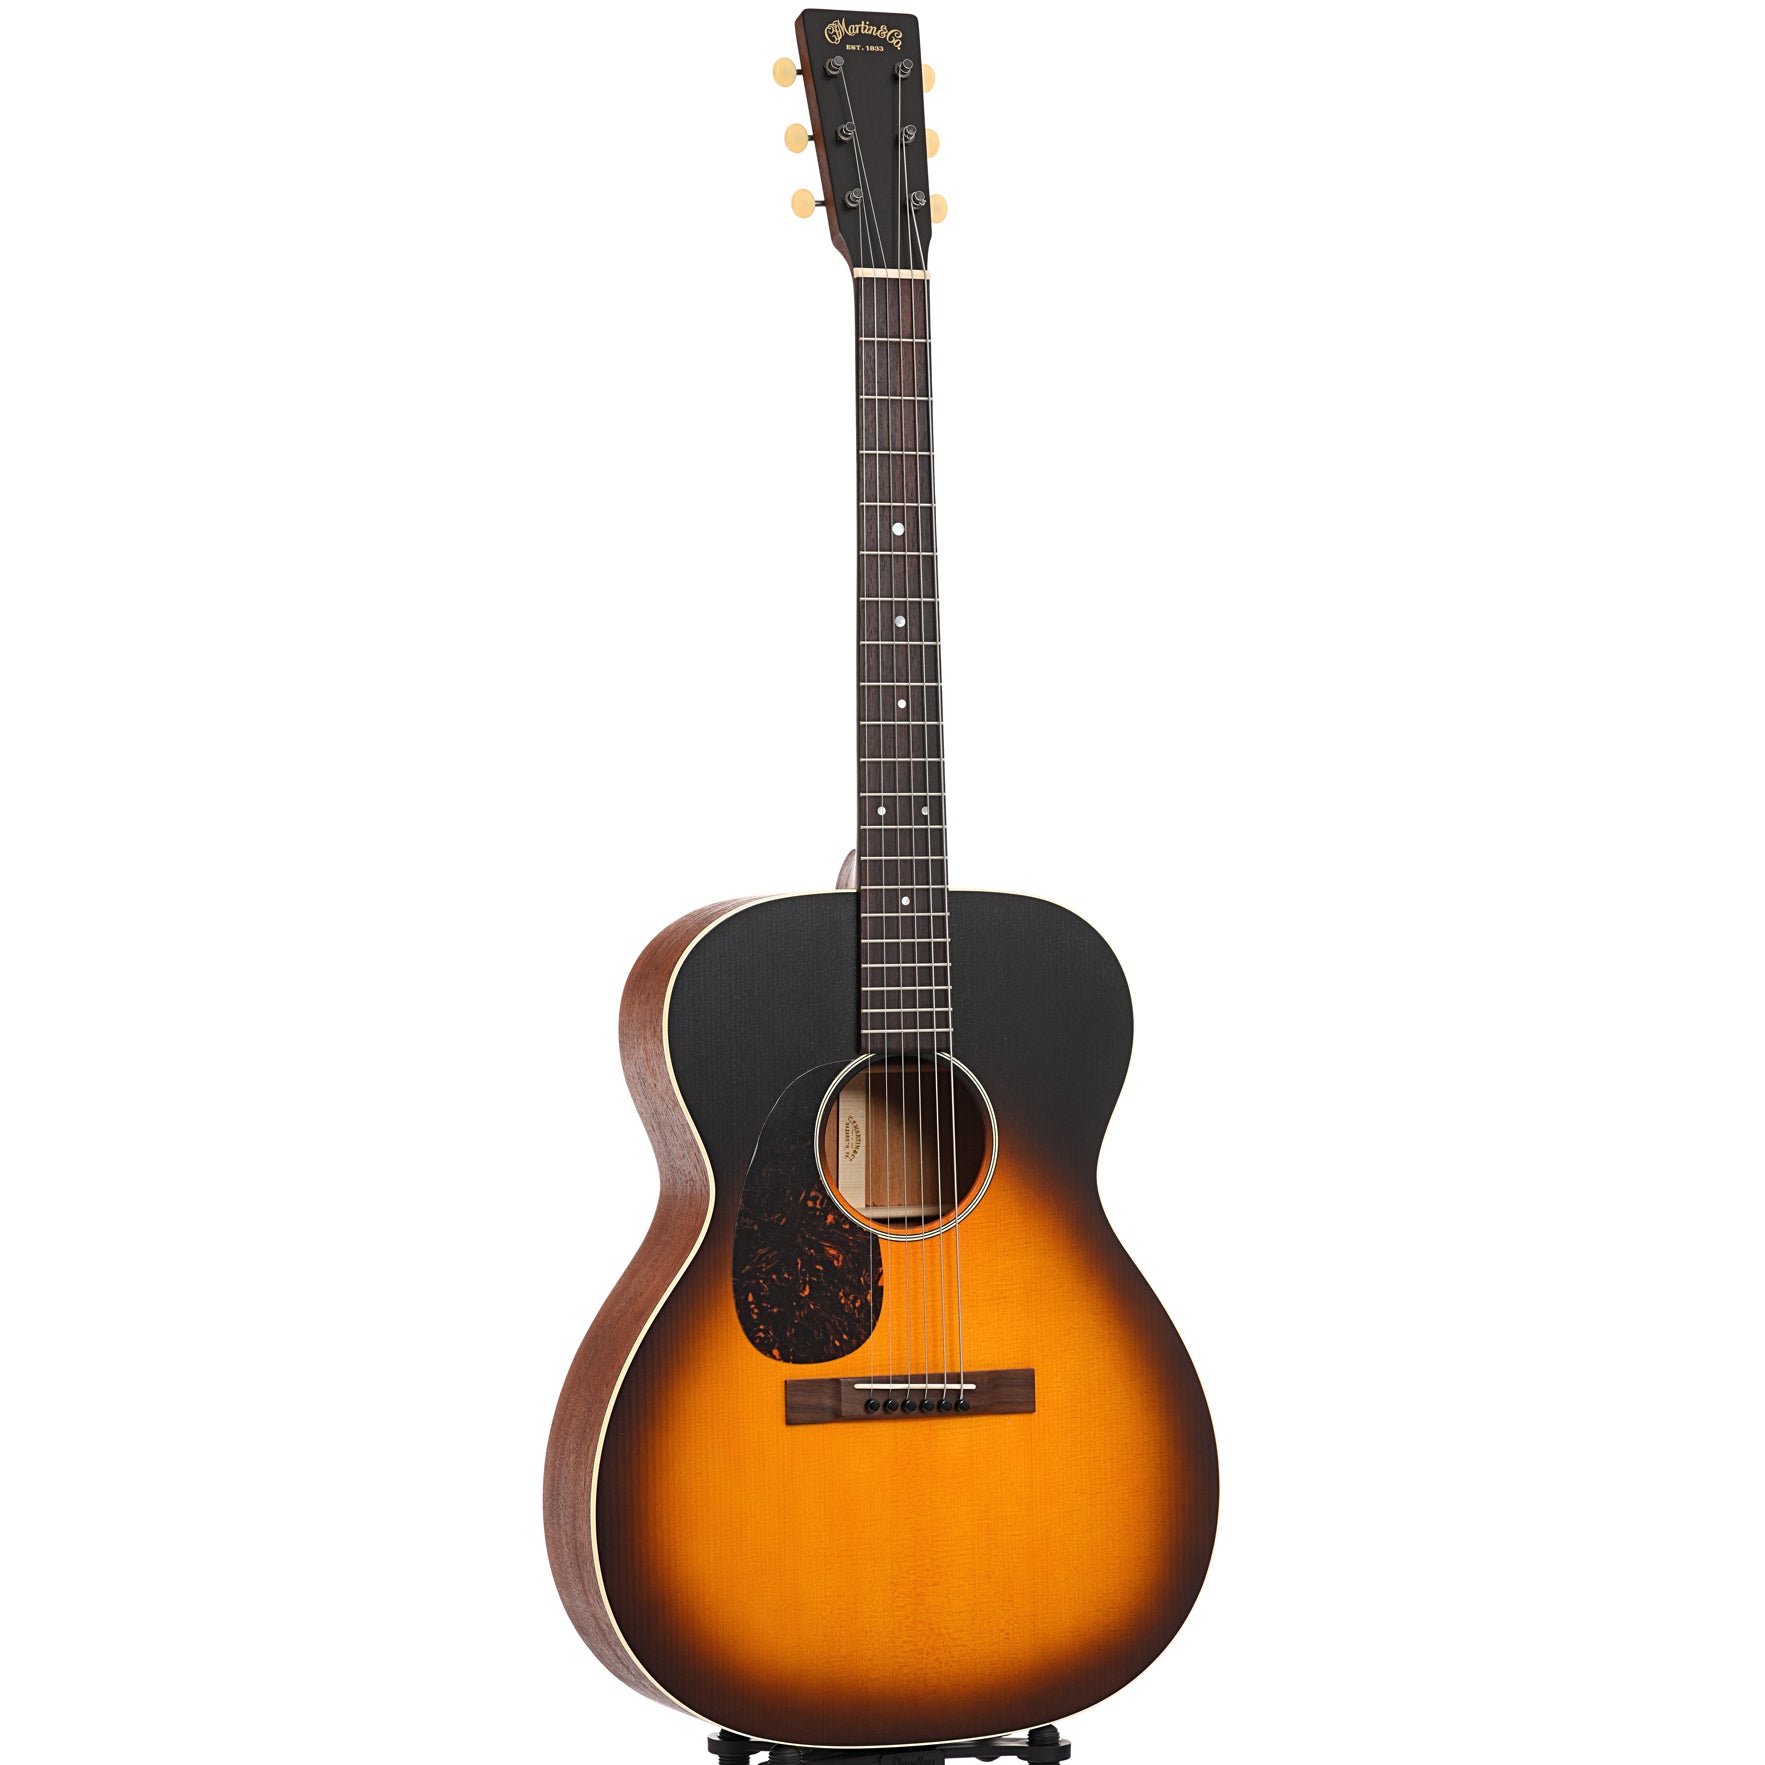 Full front and side of Martin 000-17L Lefthanded, Whiskey Sunset Finish